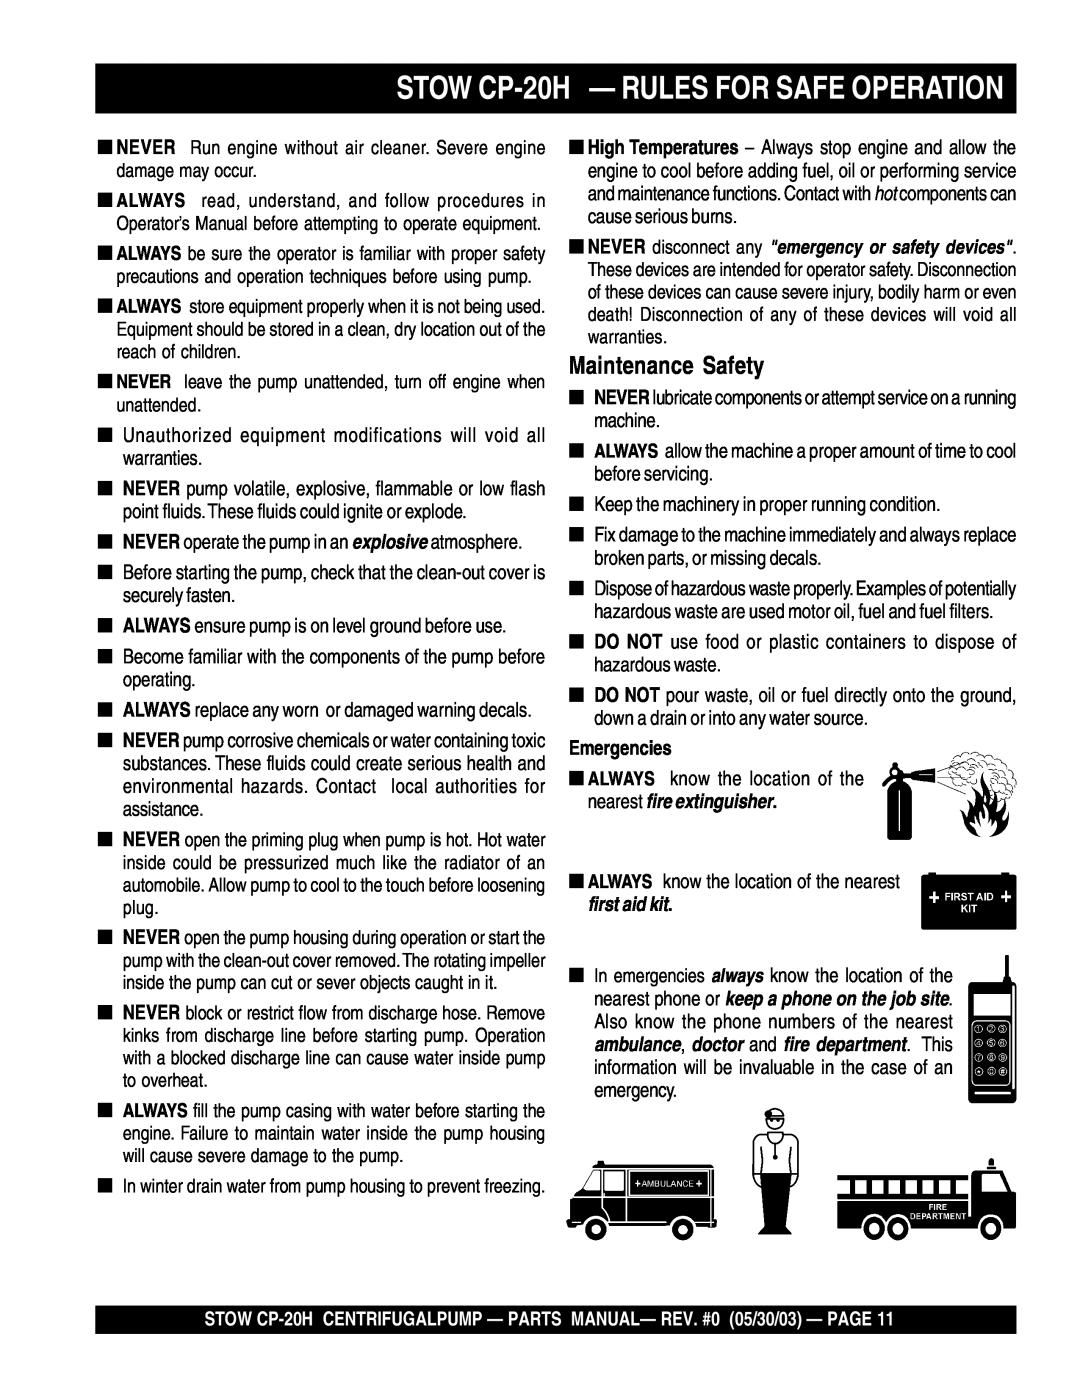 Stow manual STOW CP-20H- RULES FOR SAFE OPERATION, Maintenance Safety, Emergencies 